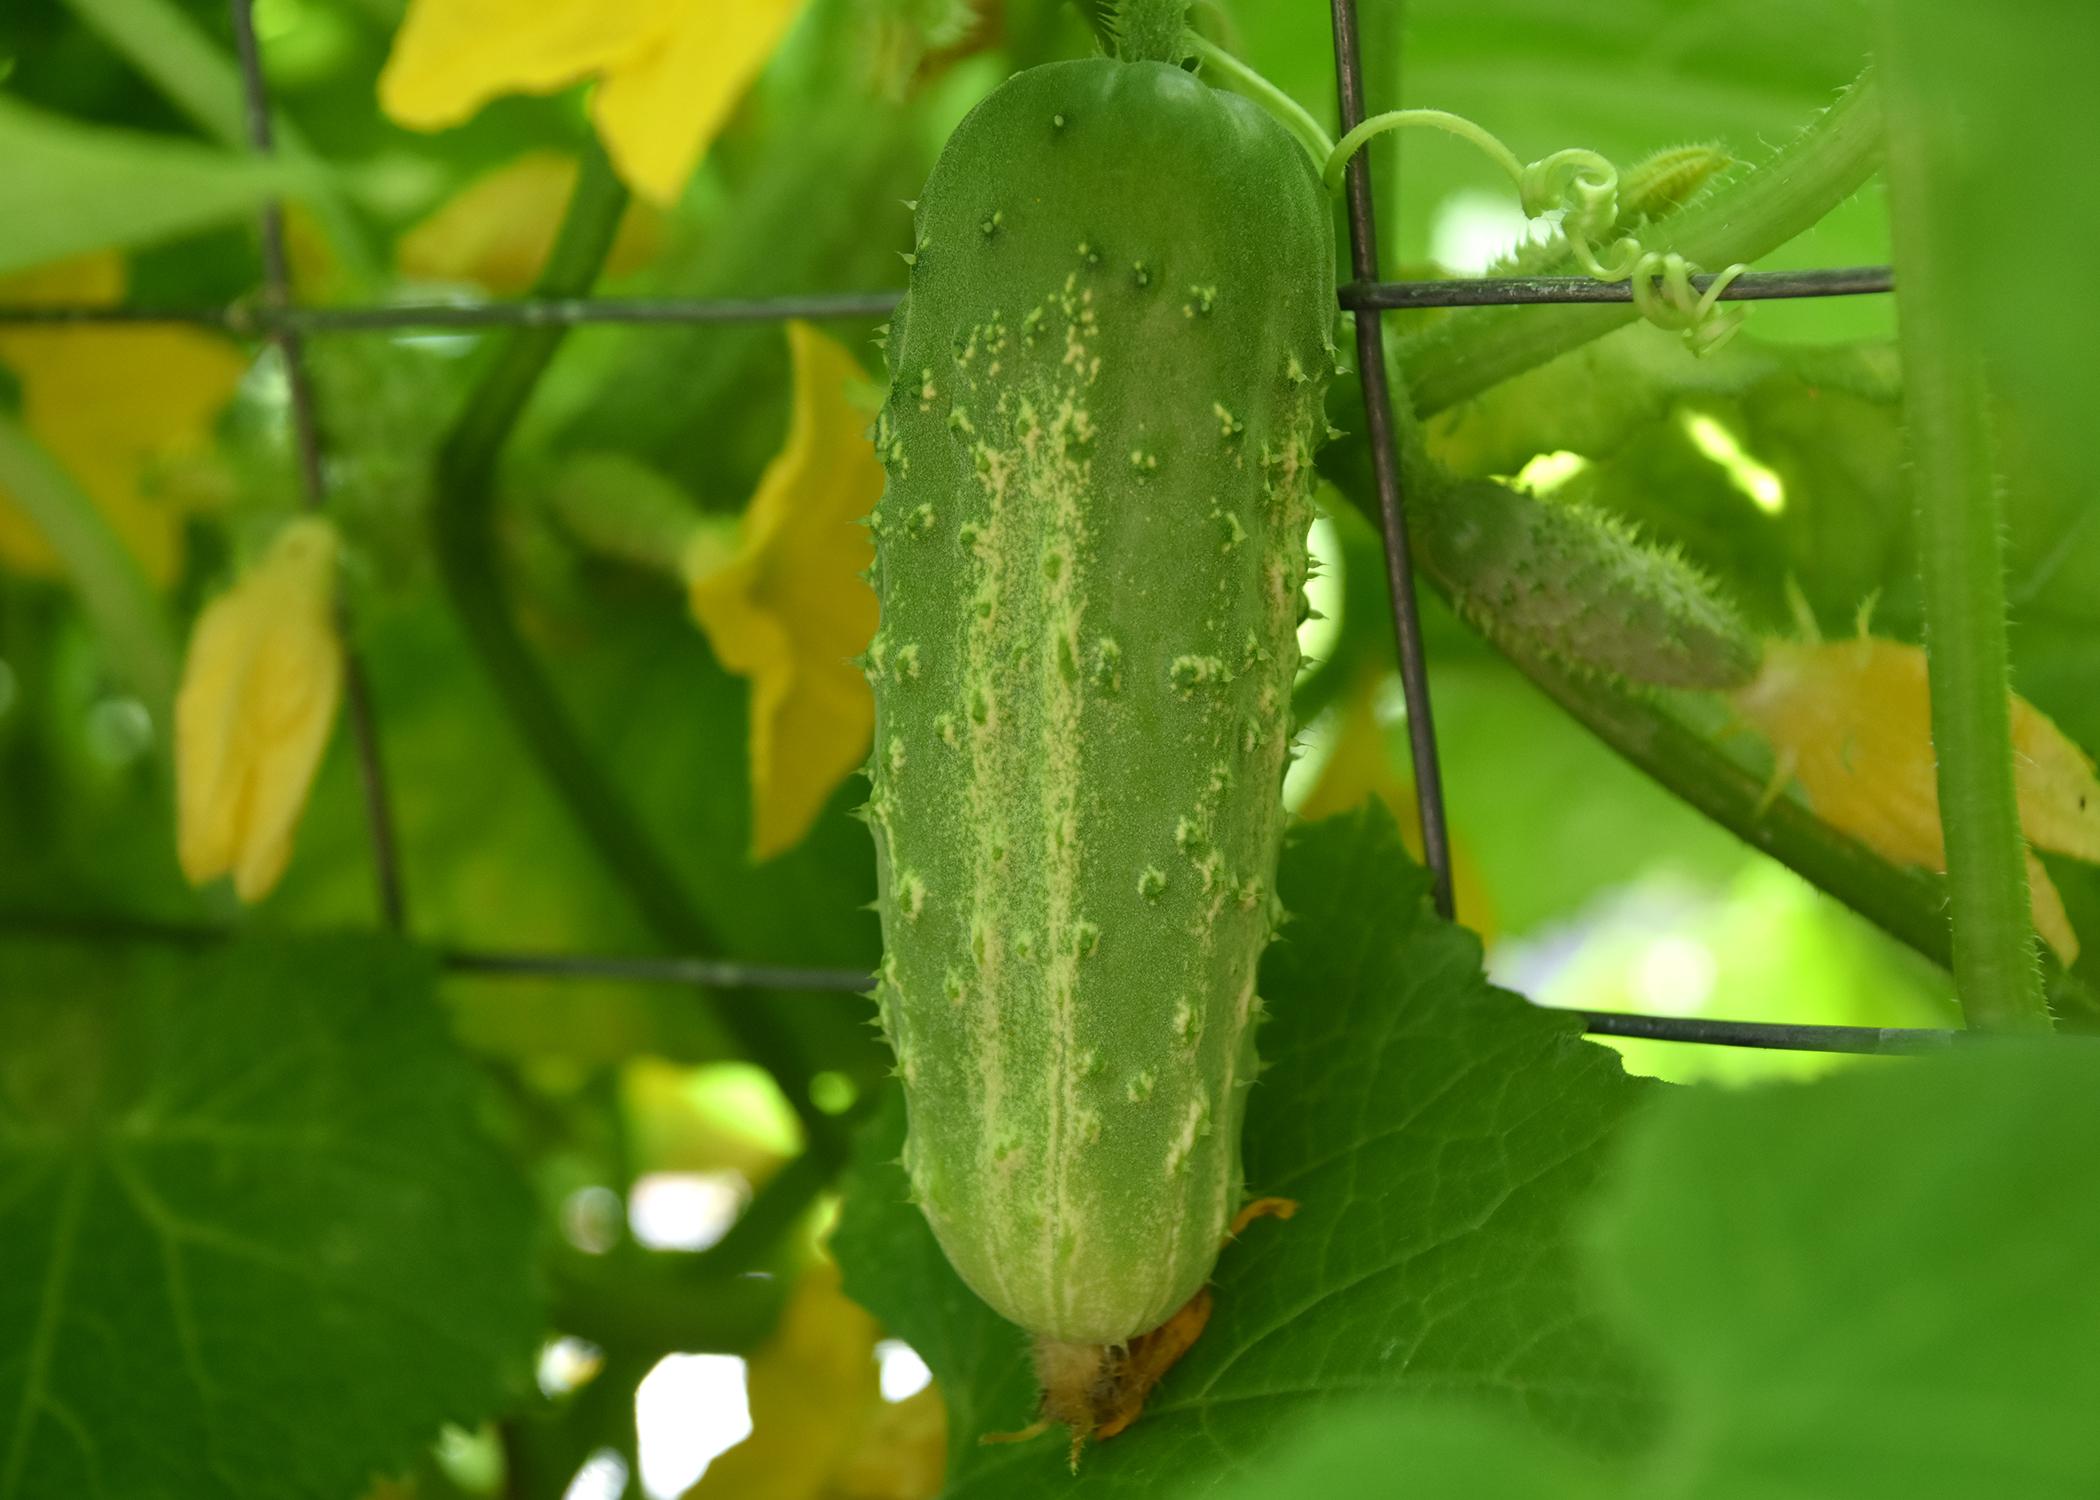 Use trellises to grow pickles to eat, share Mississippi State University Extension Service